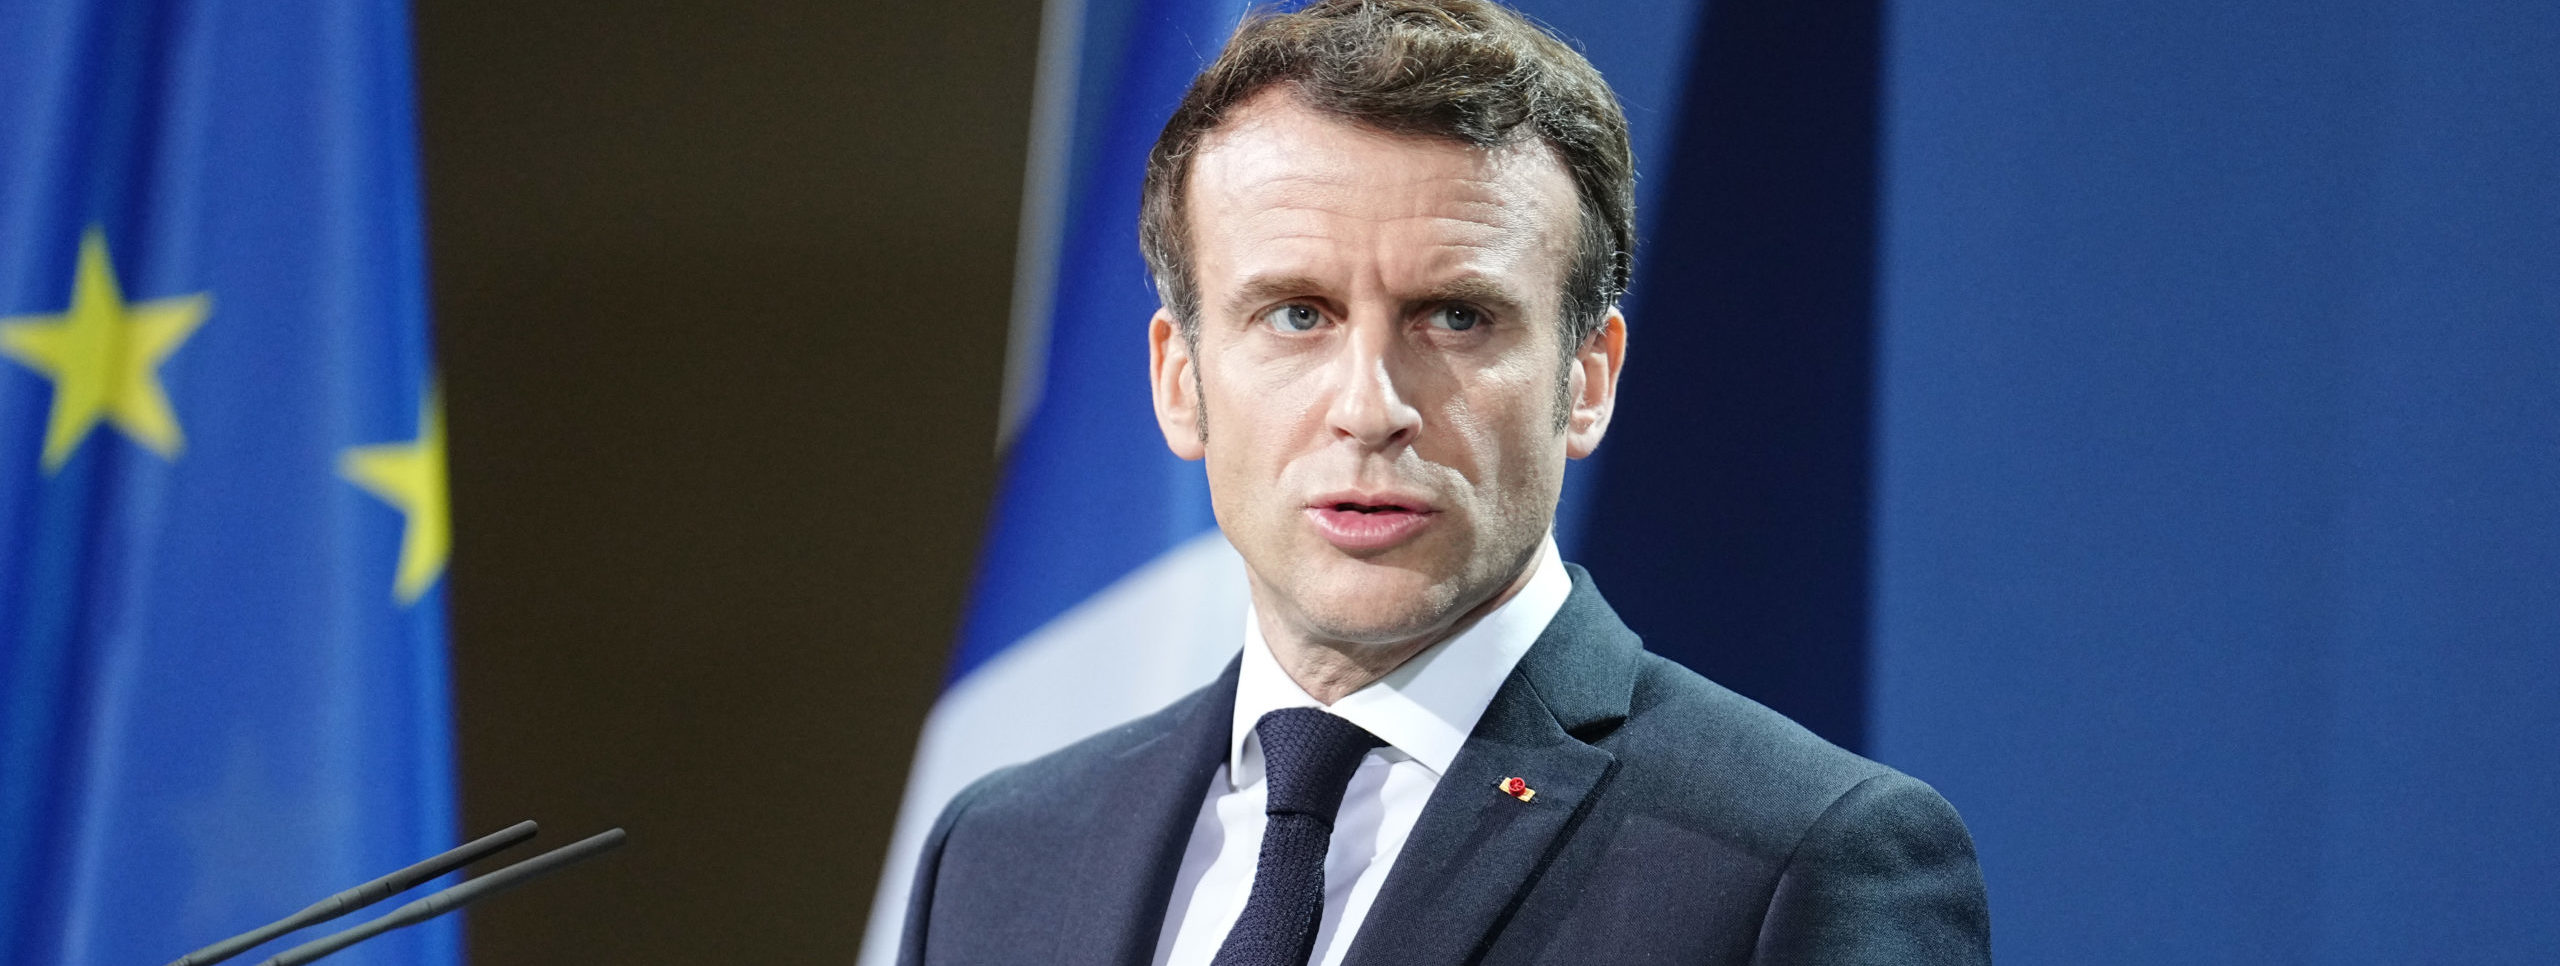 French President Macron Wins Reelection Bid Against Right Wing Challenger Le Pen The Daily Caller